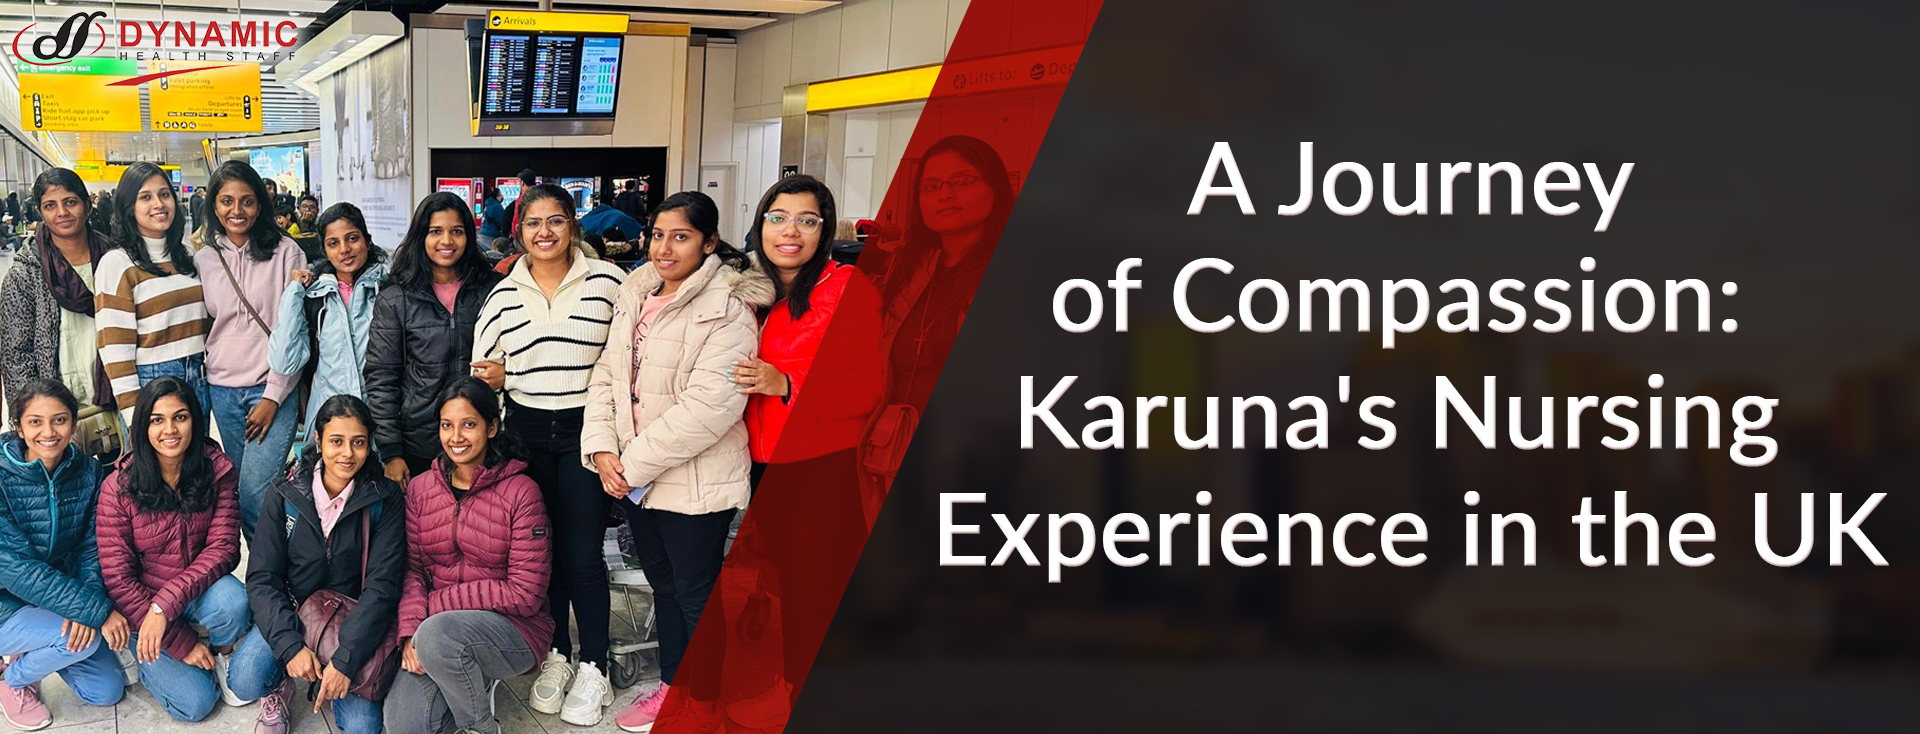 A Journey of Compassion: Karuna's Nursing Experience in the UK